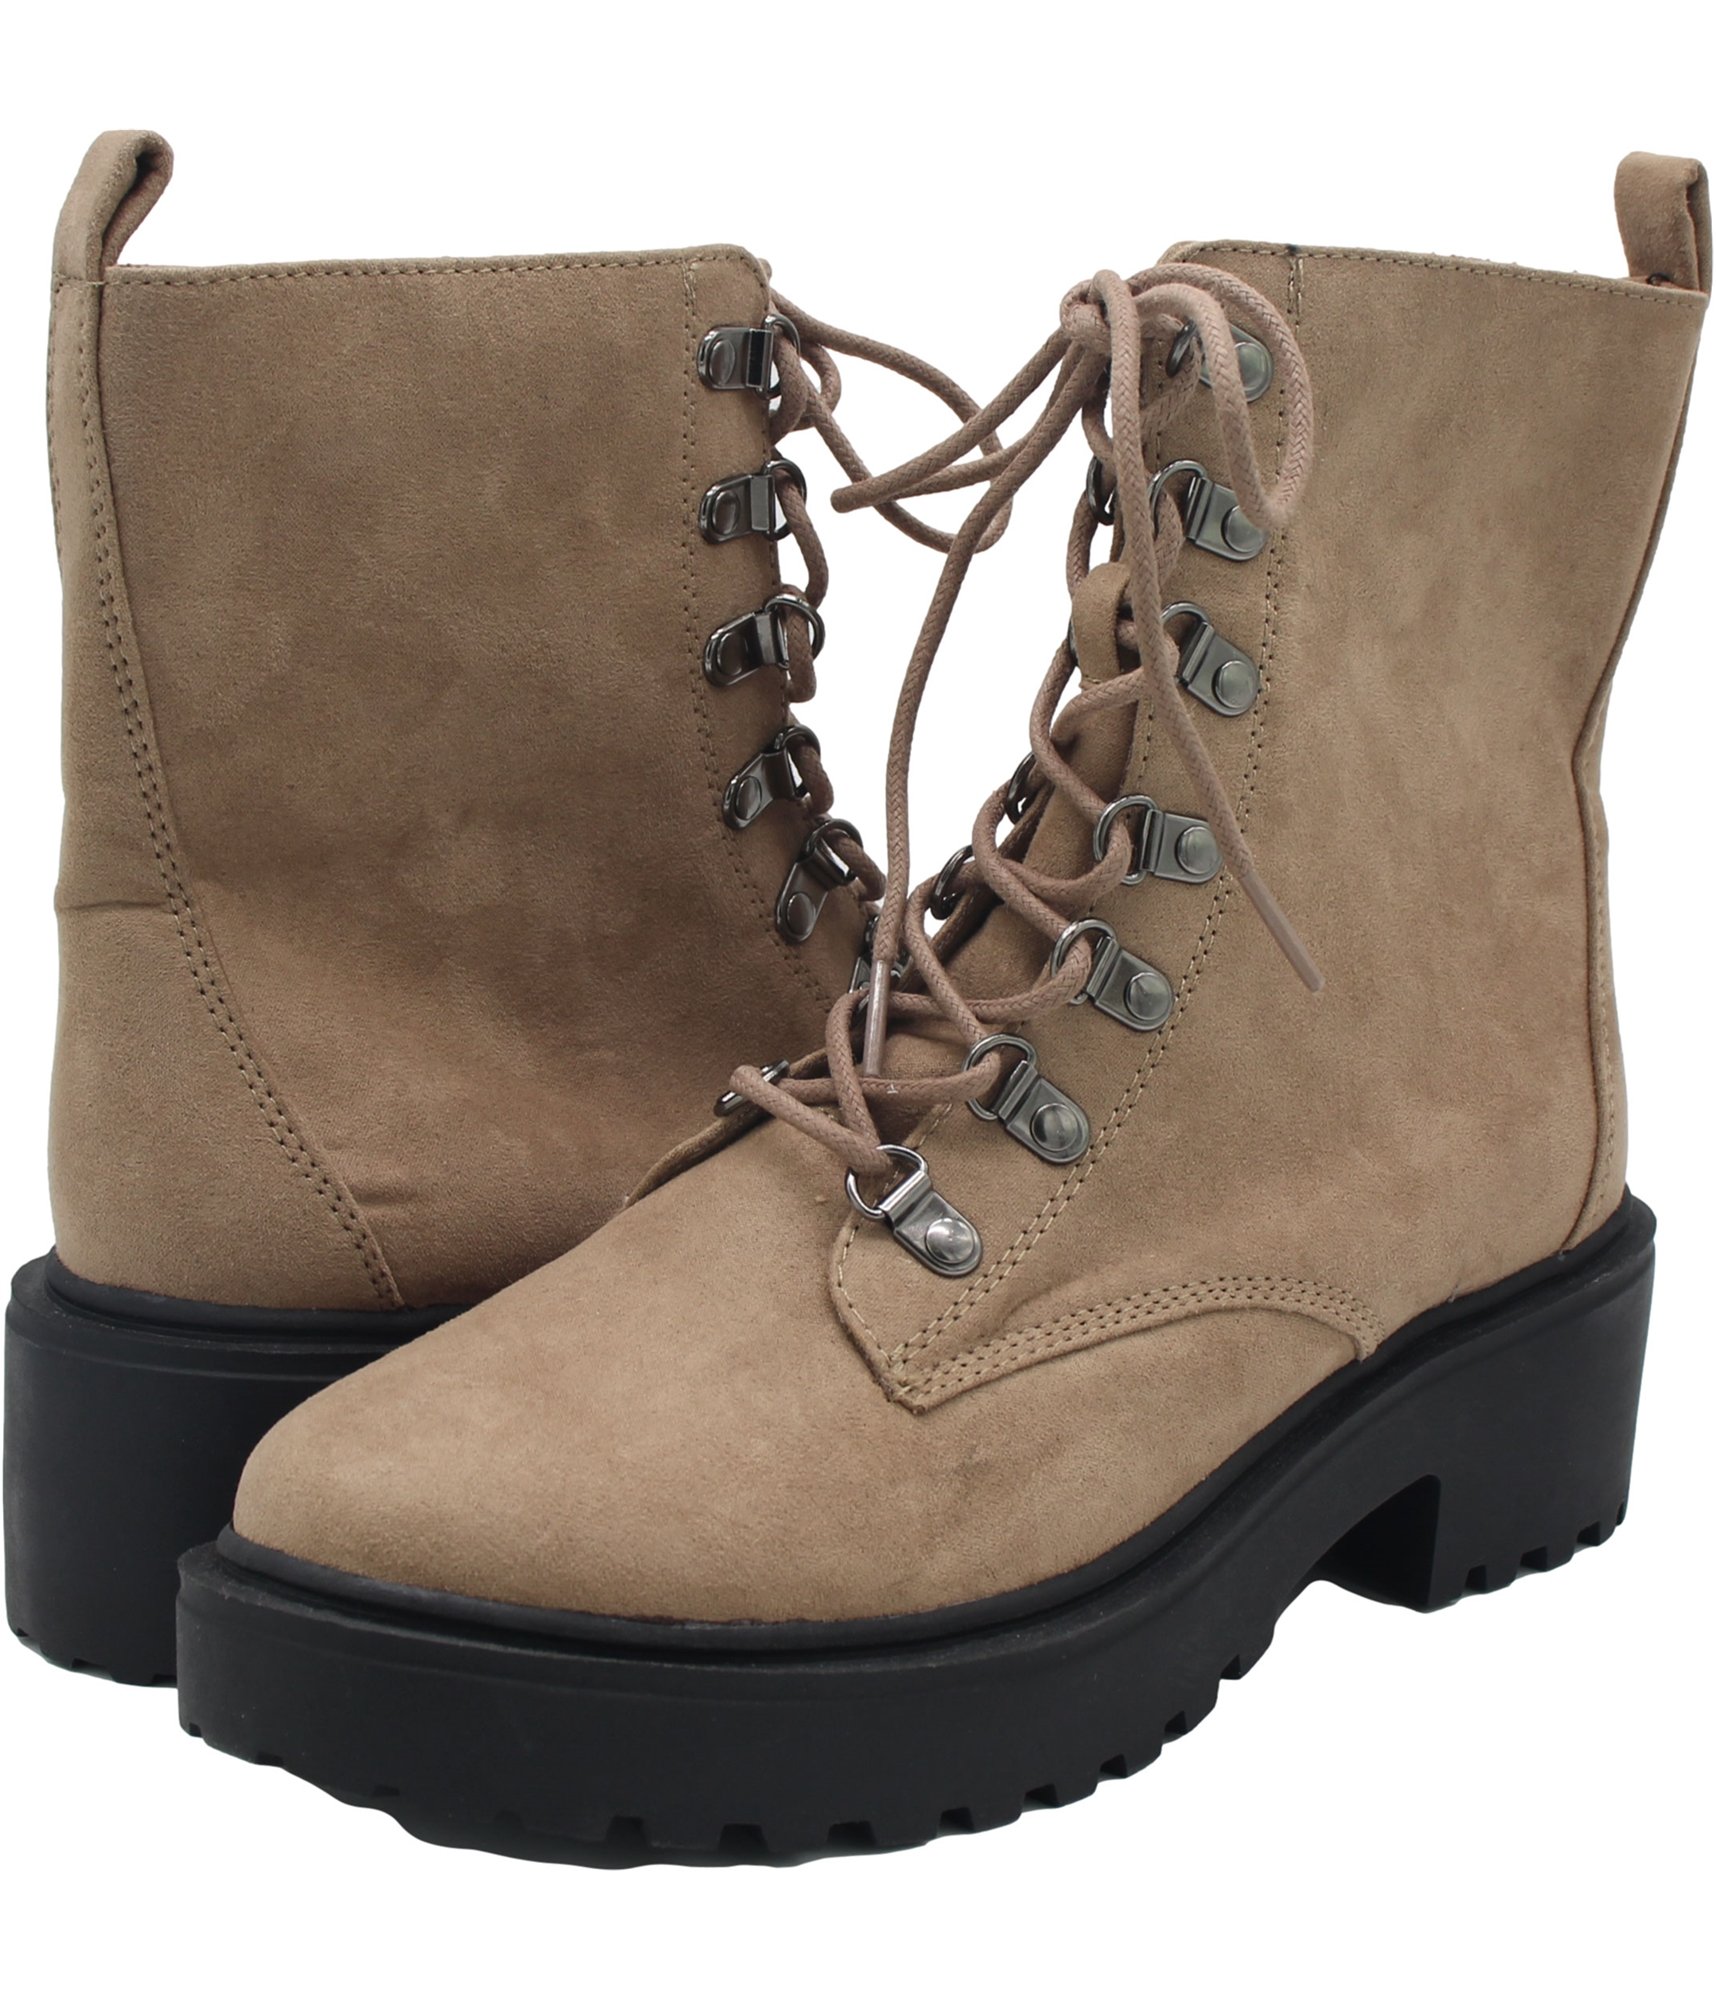 Brown-suede-two-tone-combat-boots